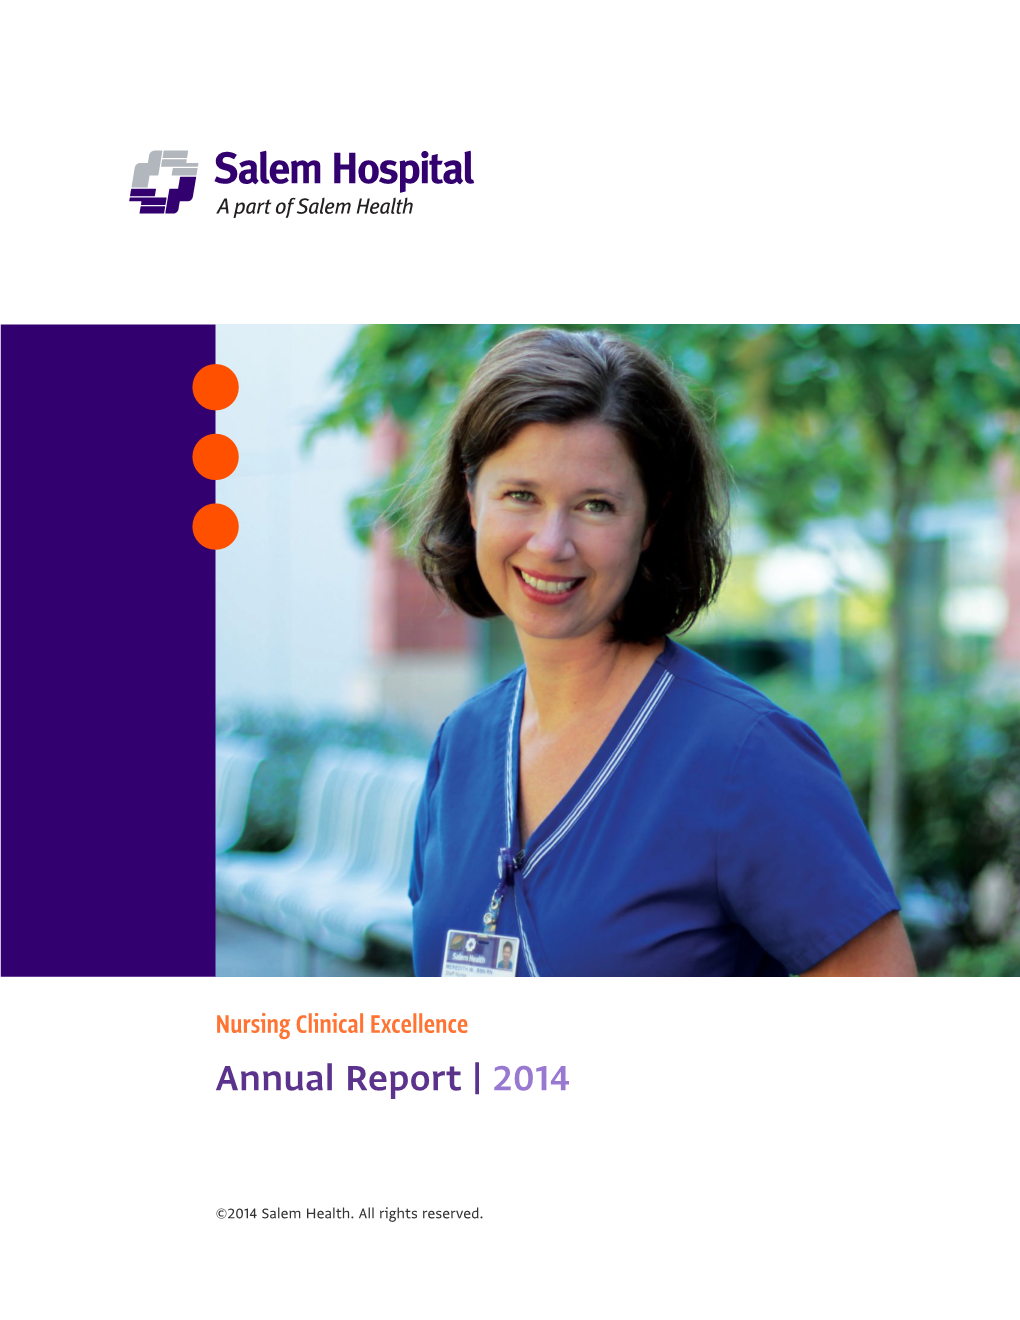 Nursing Clinical Excellence Annual Report | 2014